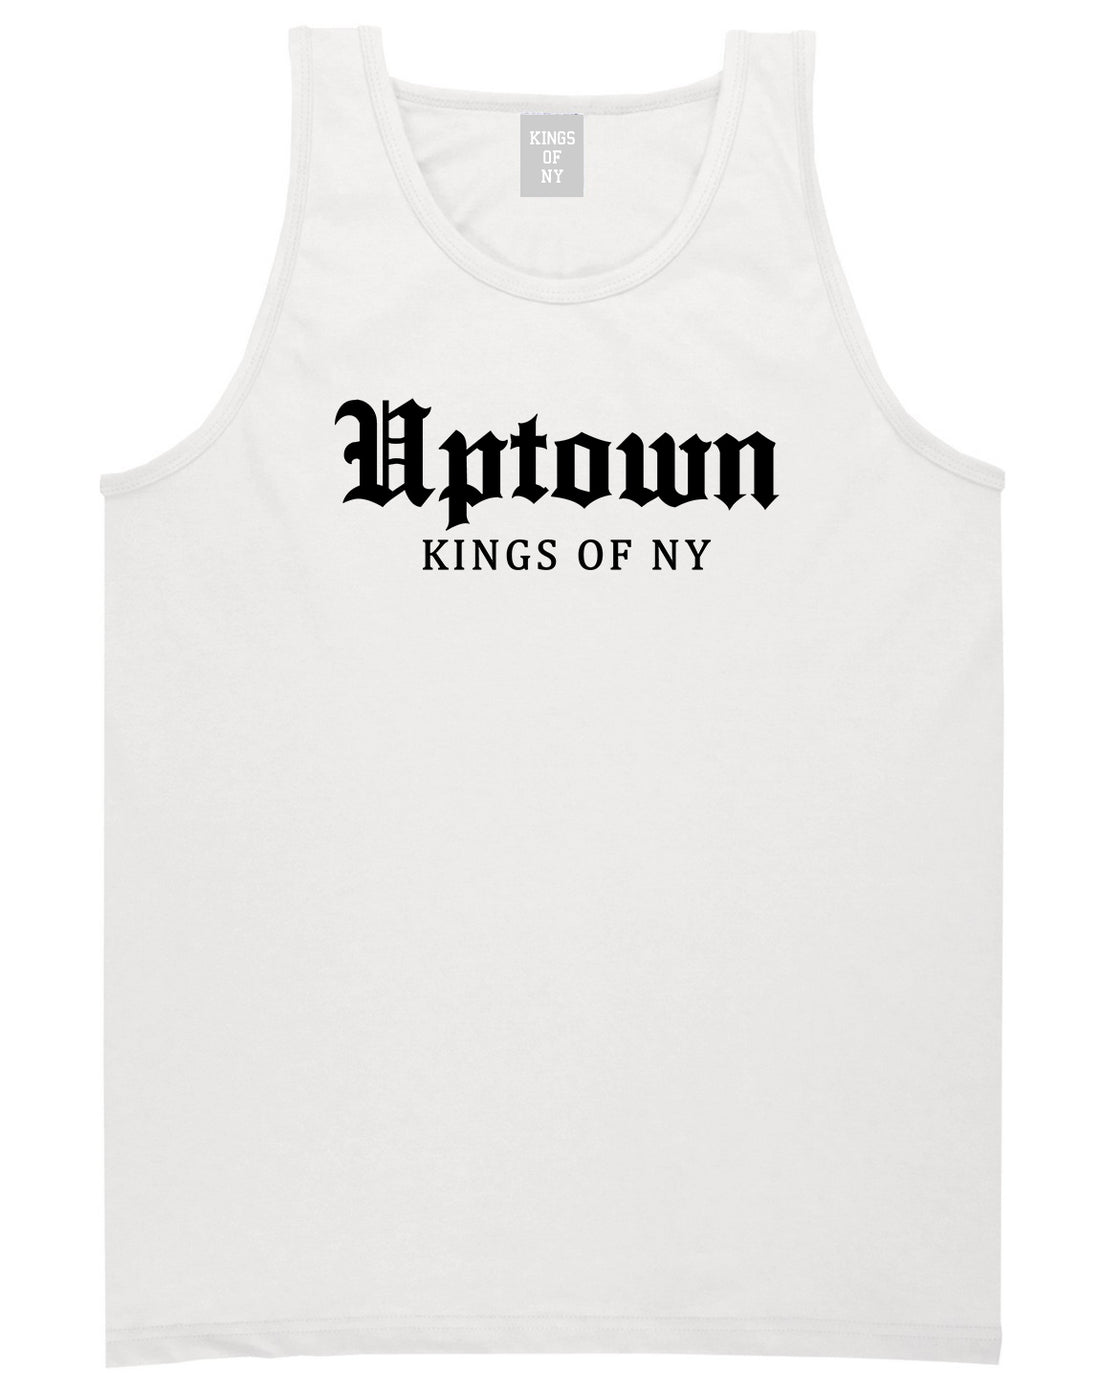 Uptown Old English Mens Tank Top Shirt White by Kings Of NY